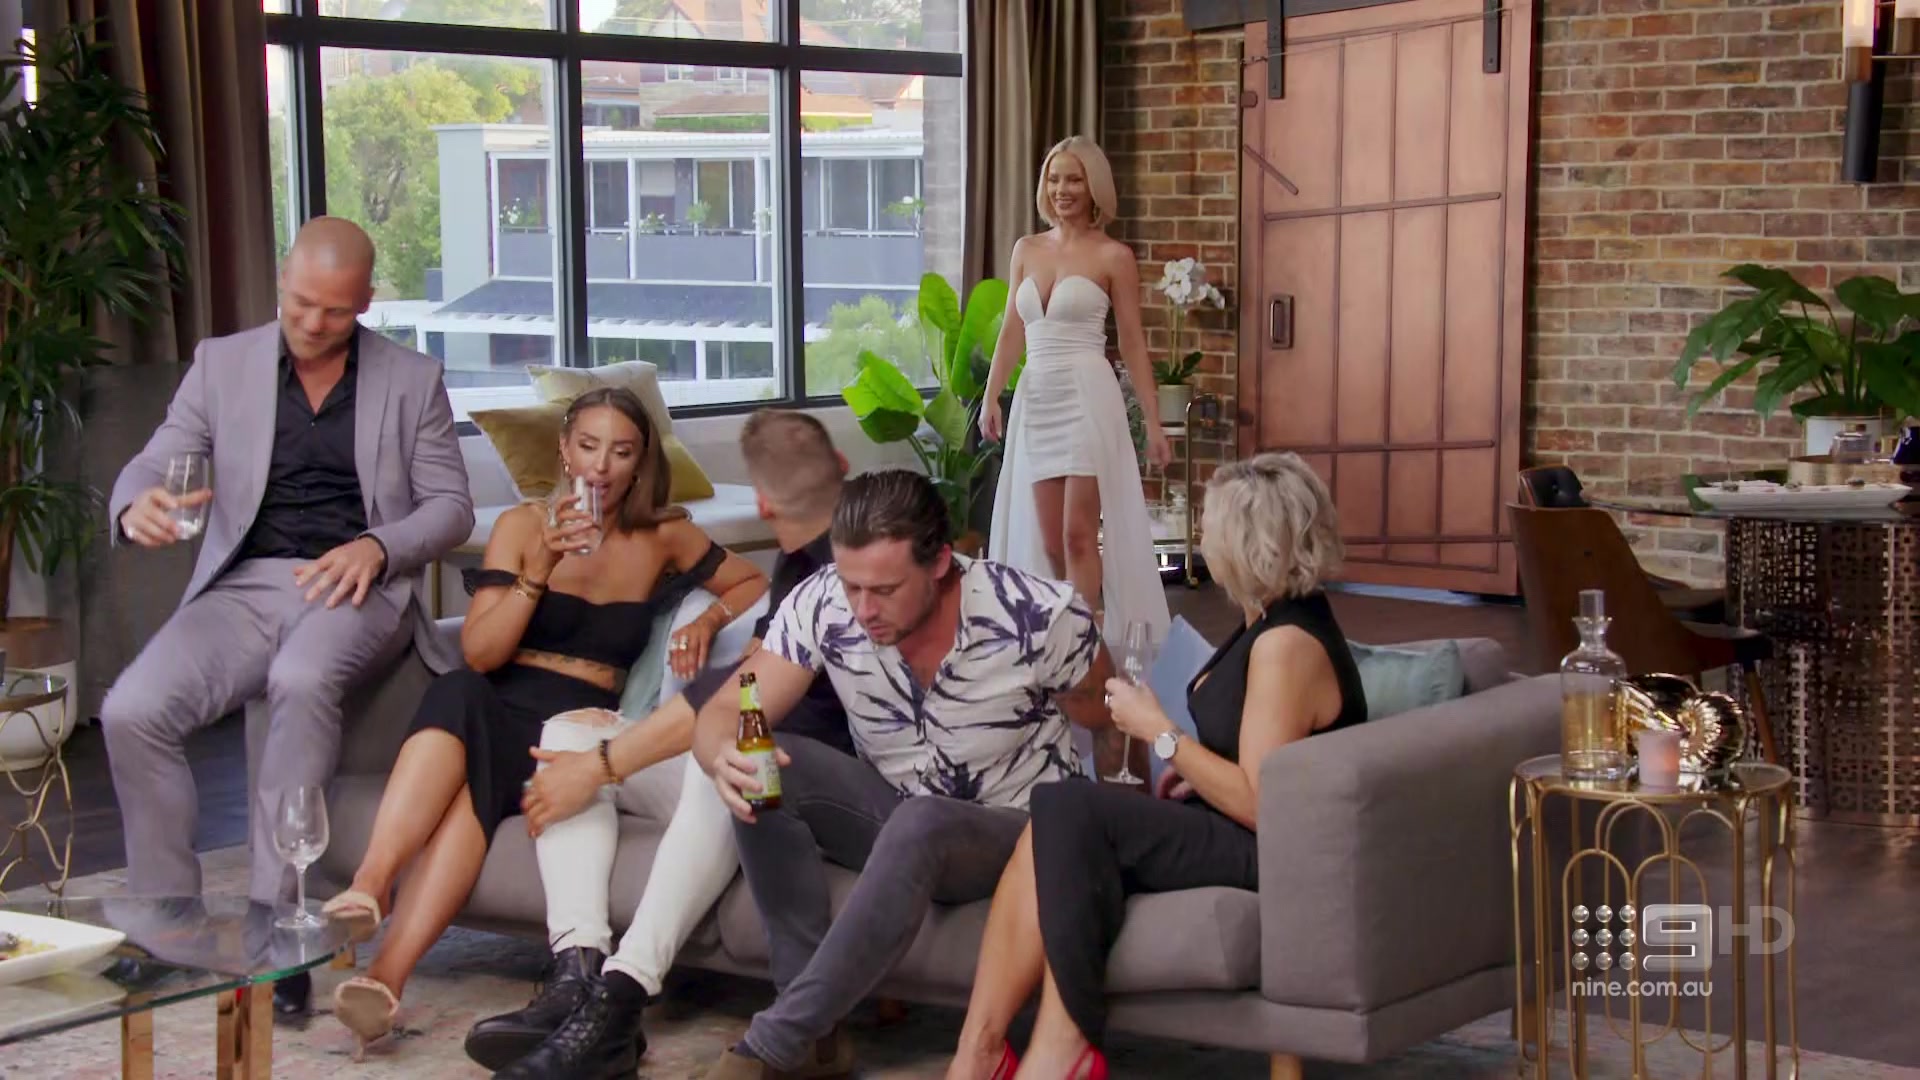 Married At First Sight AU S08E00 Grand Reunion Event Part 1 1080p HDTV - Married At First Sight Australia Season 8 Grand Reunion